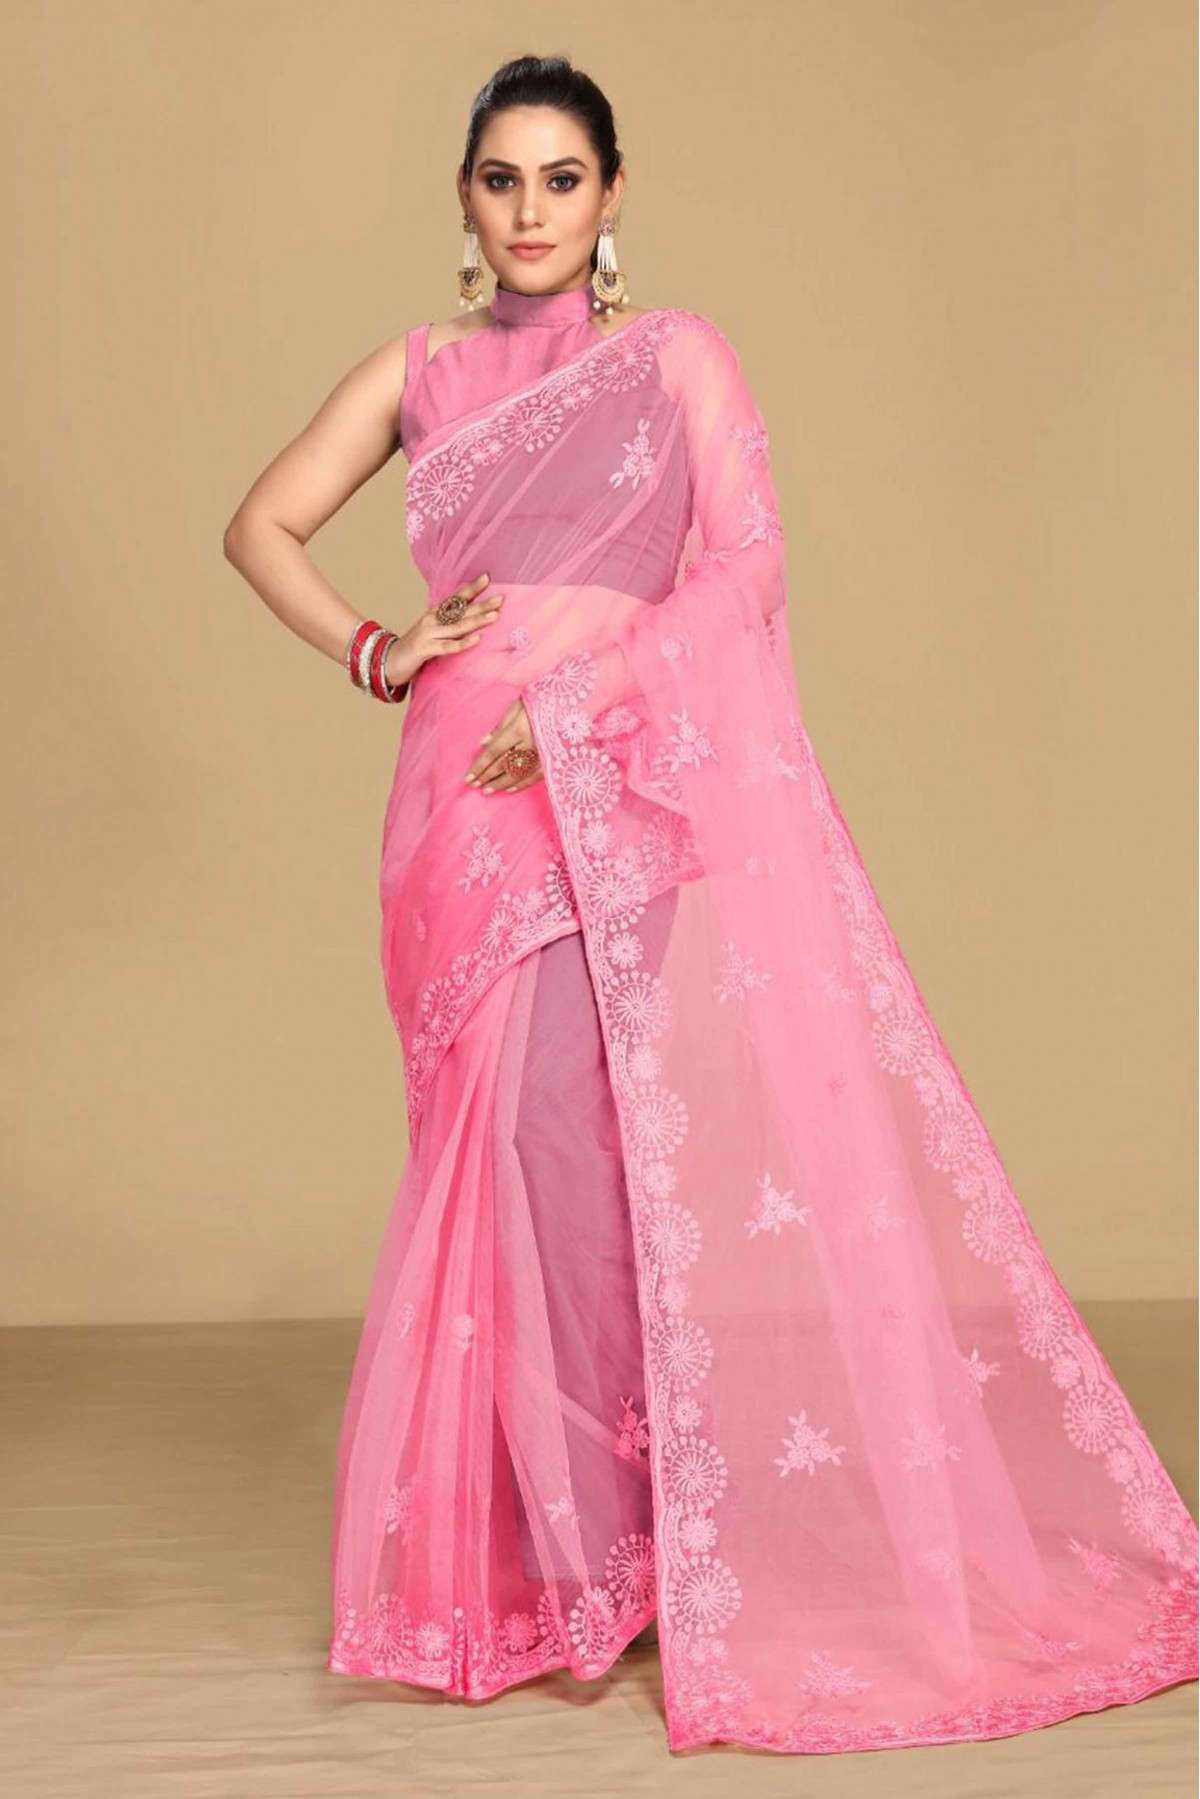 Net Embroidery Saree In Pink Colour - SR1775585